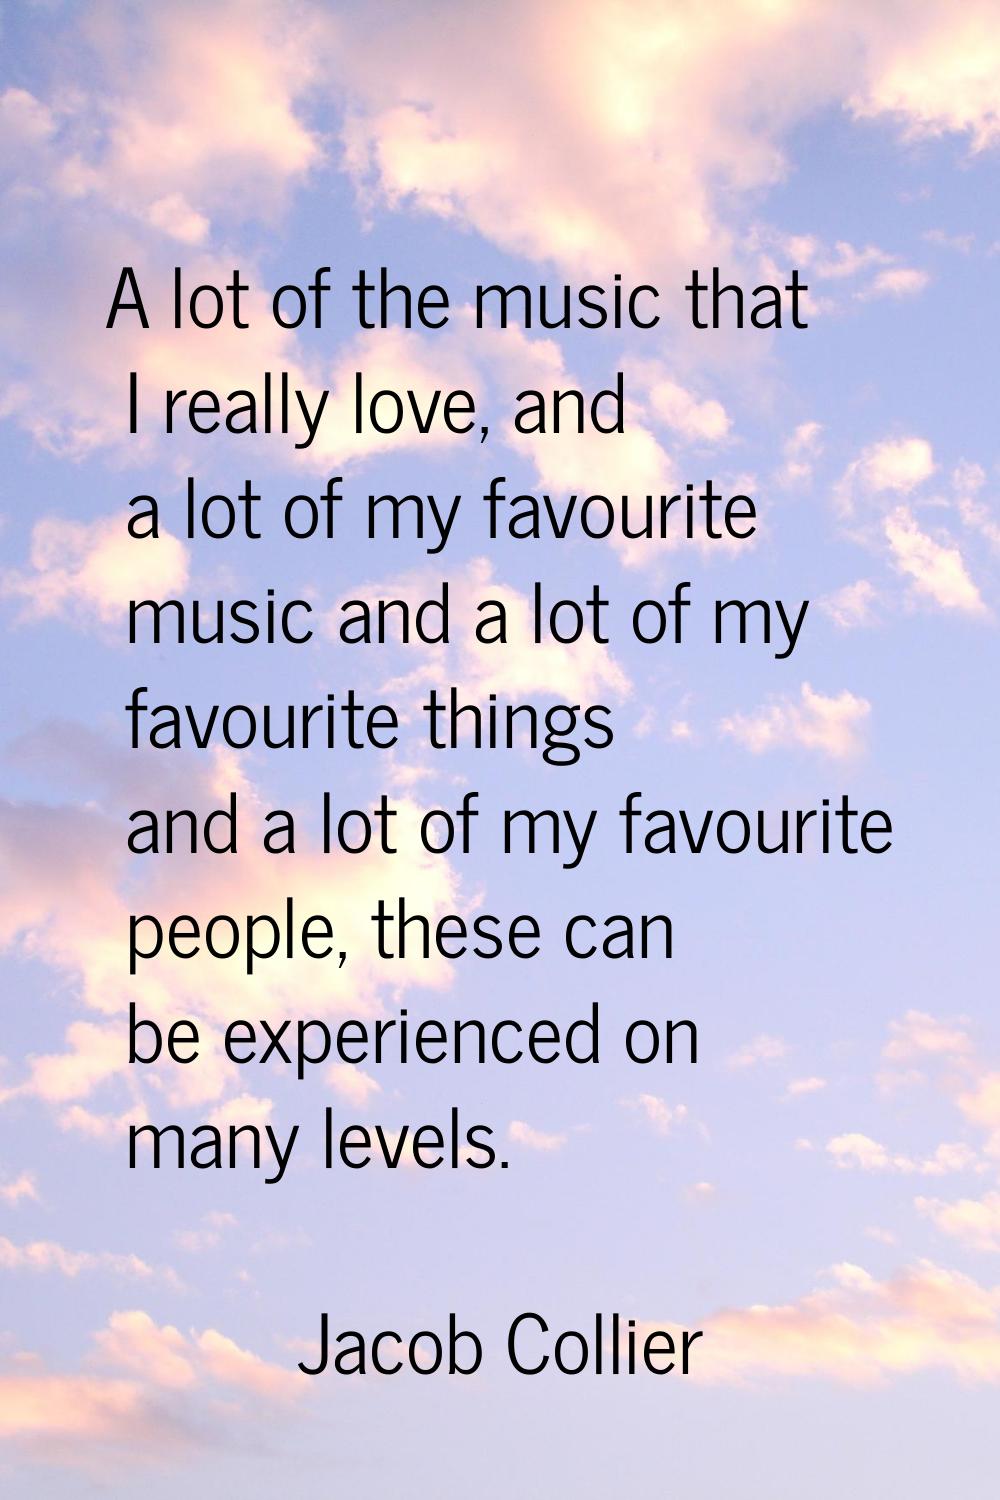 A lot of the music that I really love, and a lot of my favourite music and a lot of my favourite th